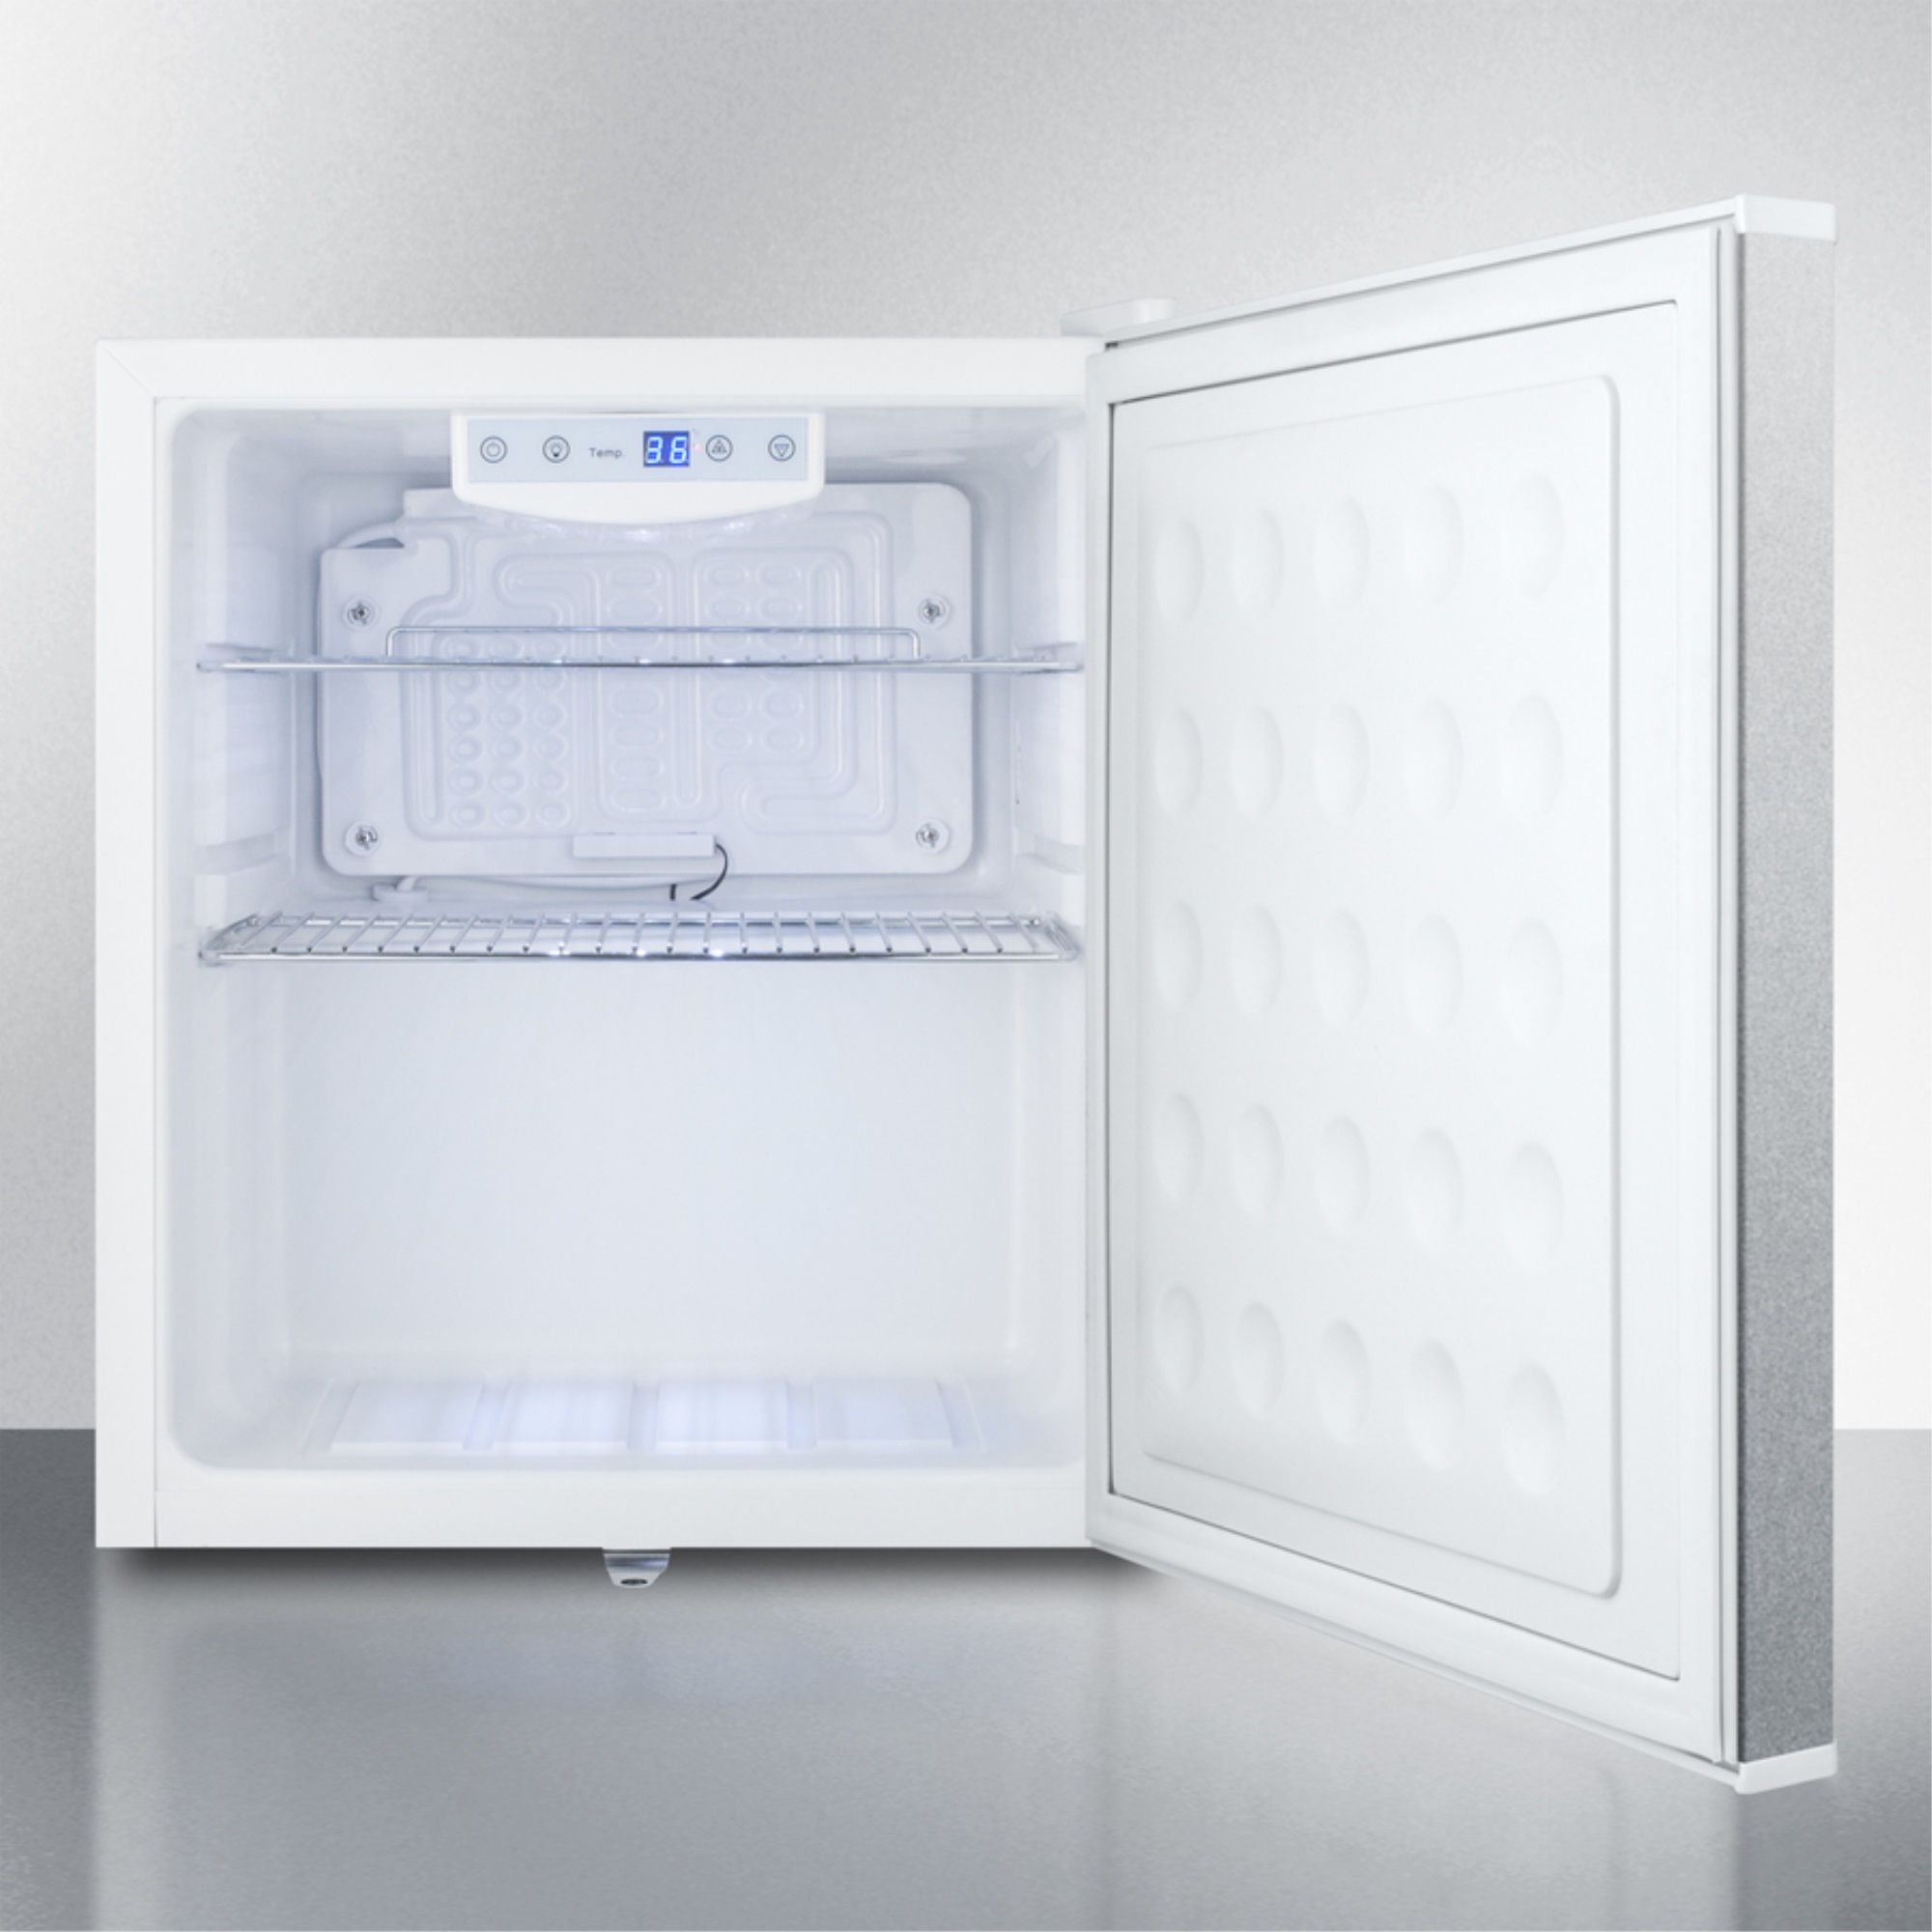 Summit Commercial Commercial style compact all-refrigerator in white with digital thermostat